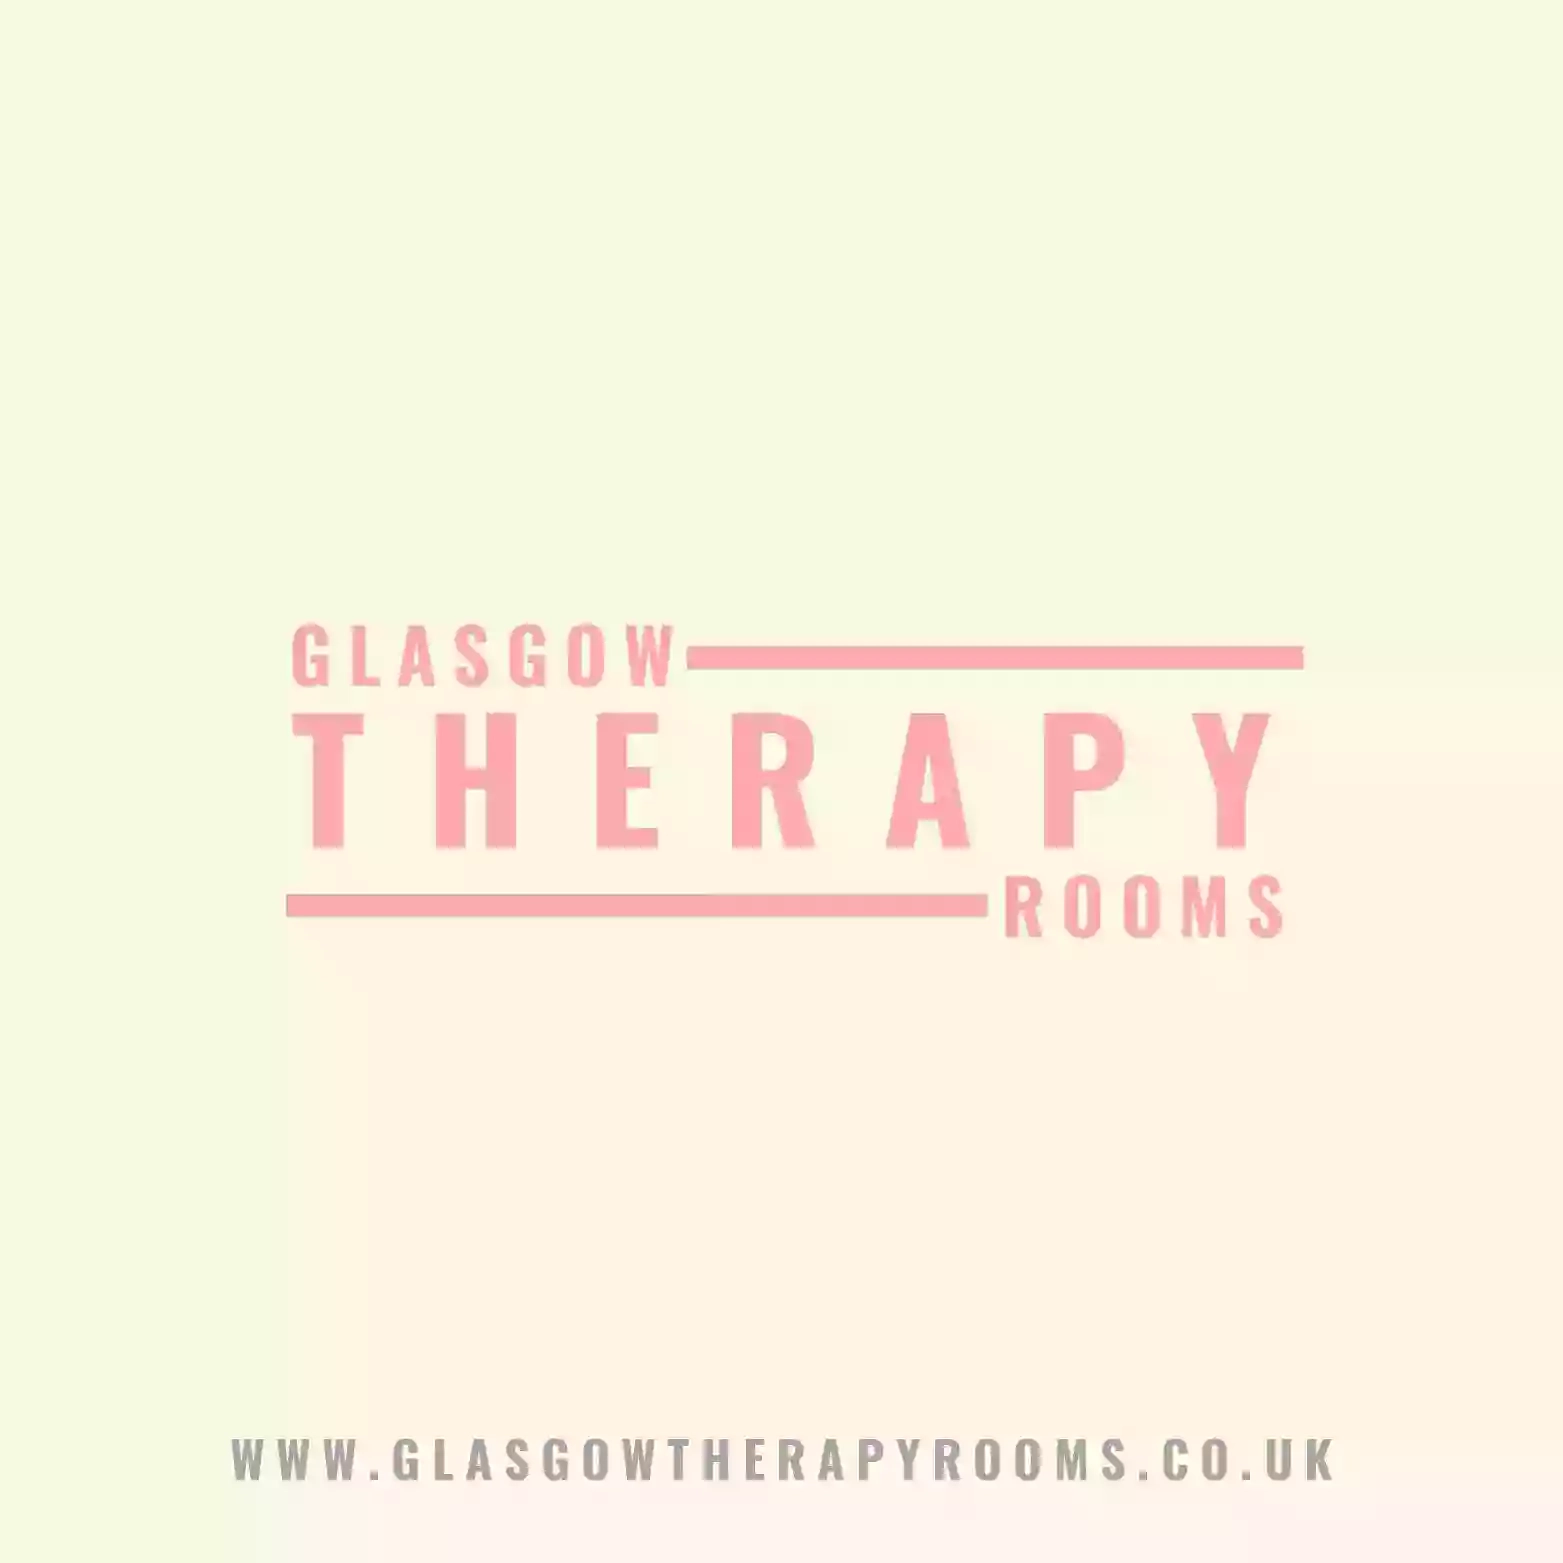 Glasgow Therapy Rooms